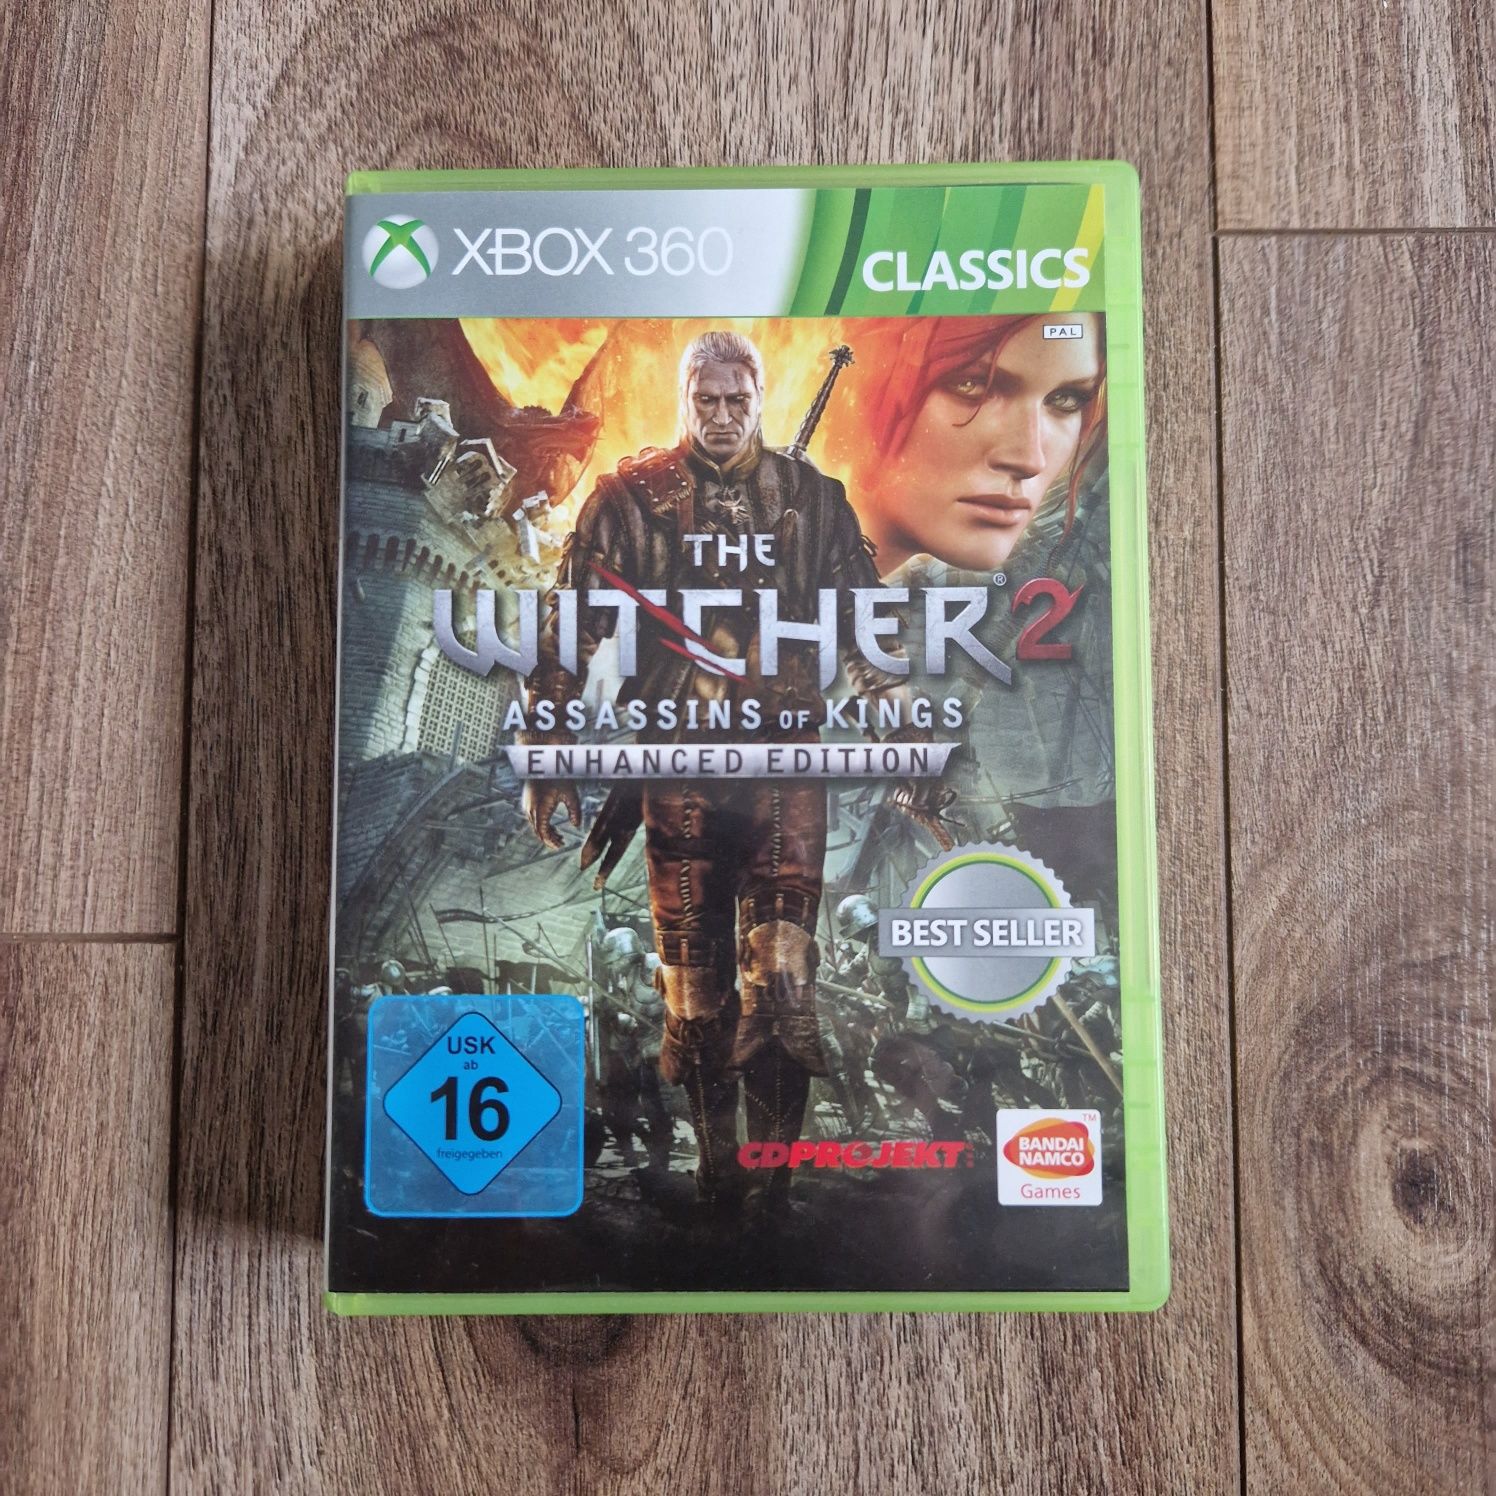 The Witcher 2 Assassins of Kings - Xbox 360